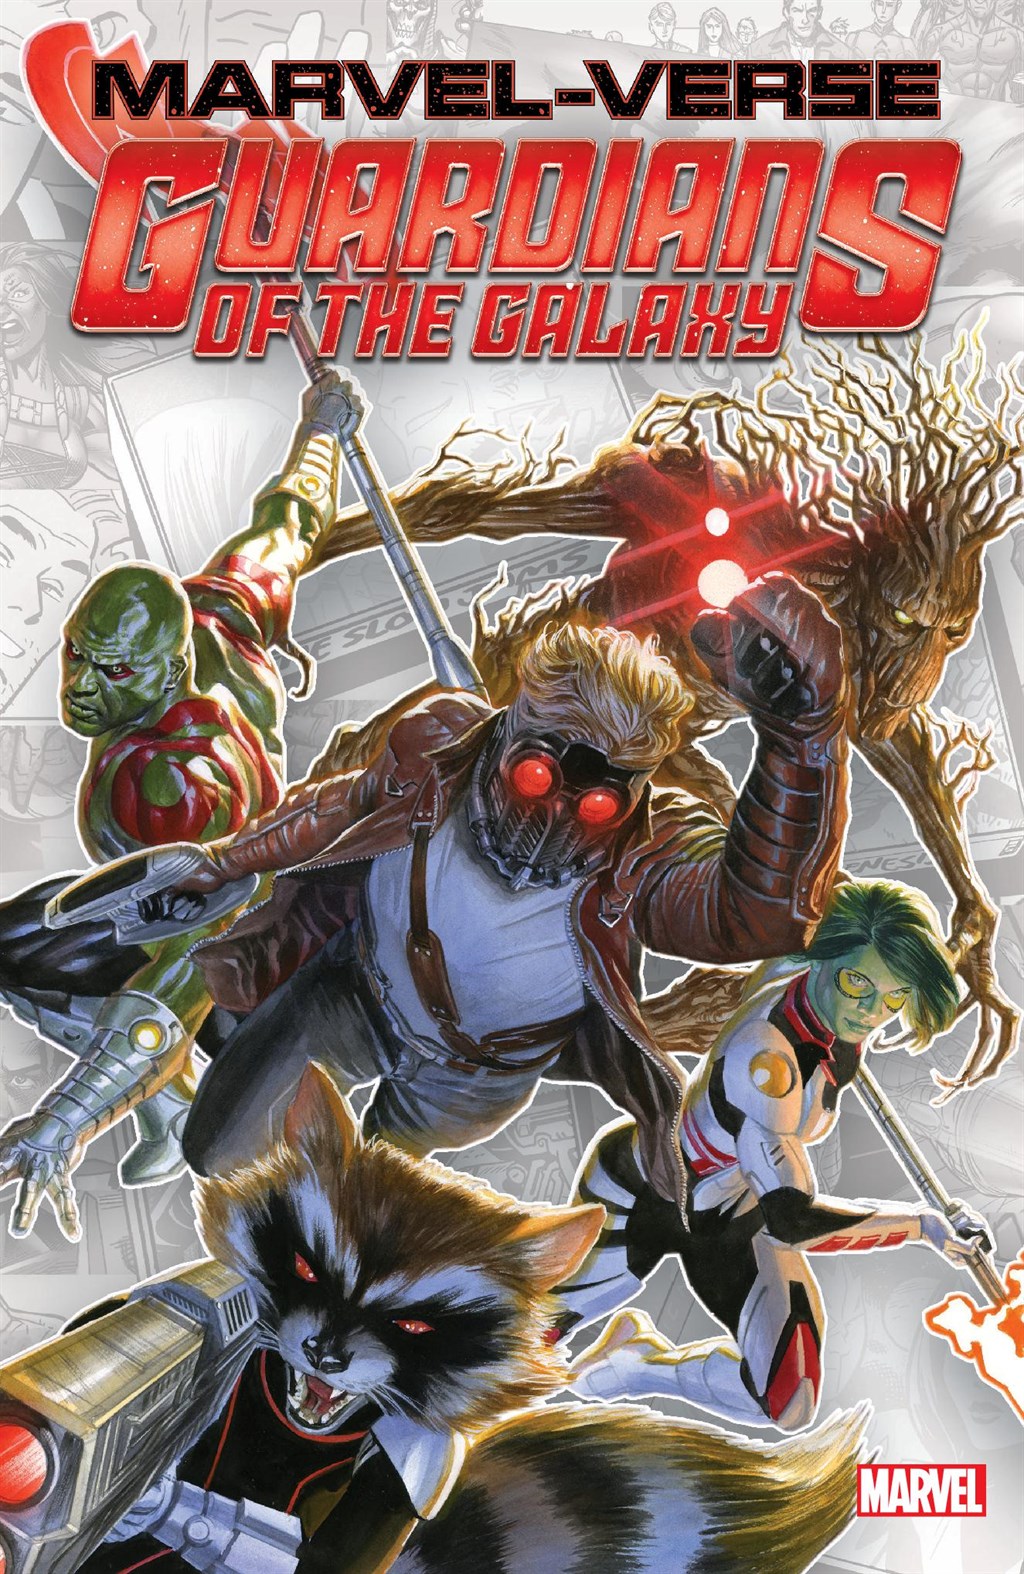 Read online Marvel-Verse: Guardians of the Galaxy comic -  Issue # TPB - 1